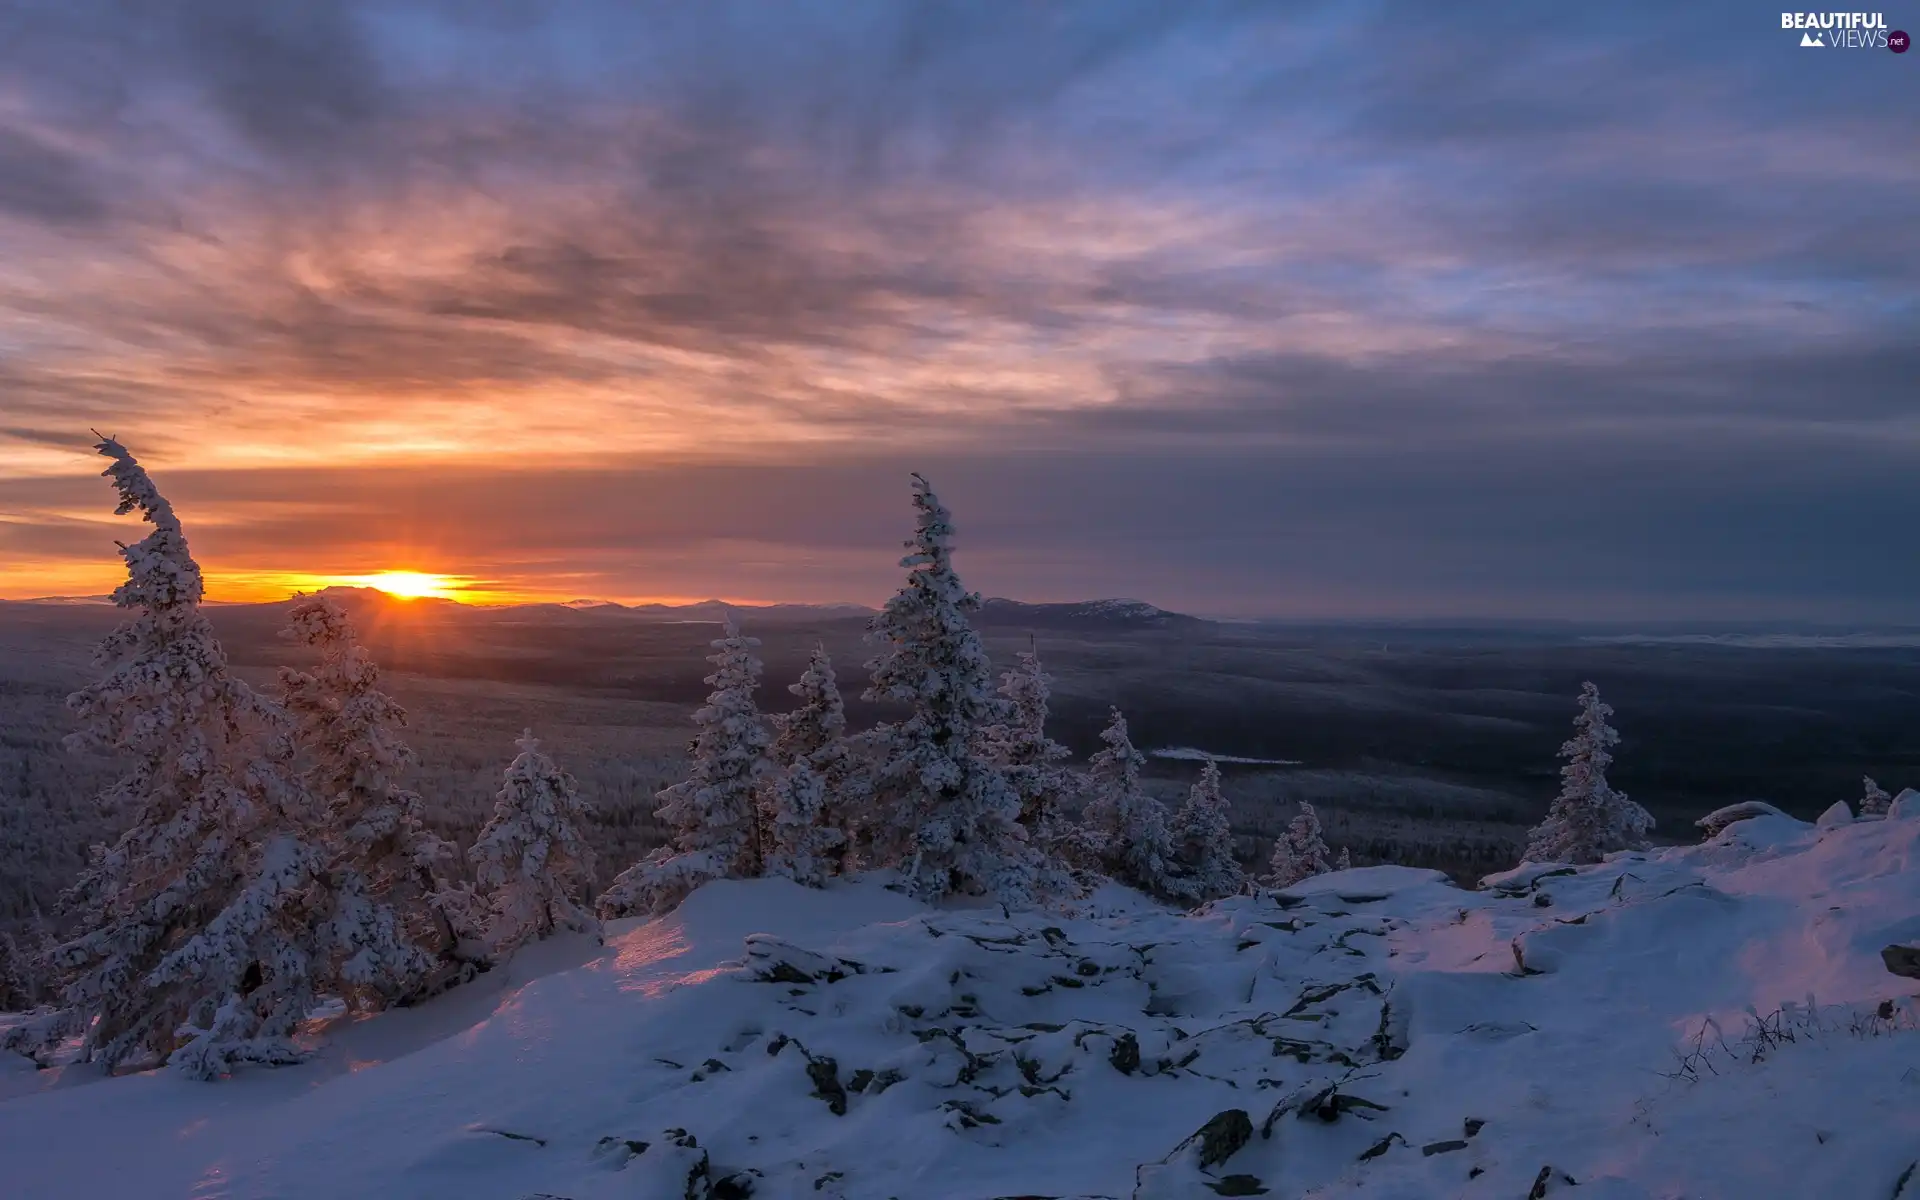 viewes, Great Sunsets, Mountains, trees, winter